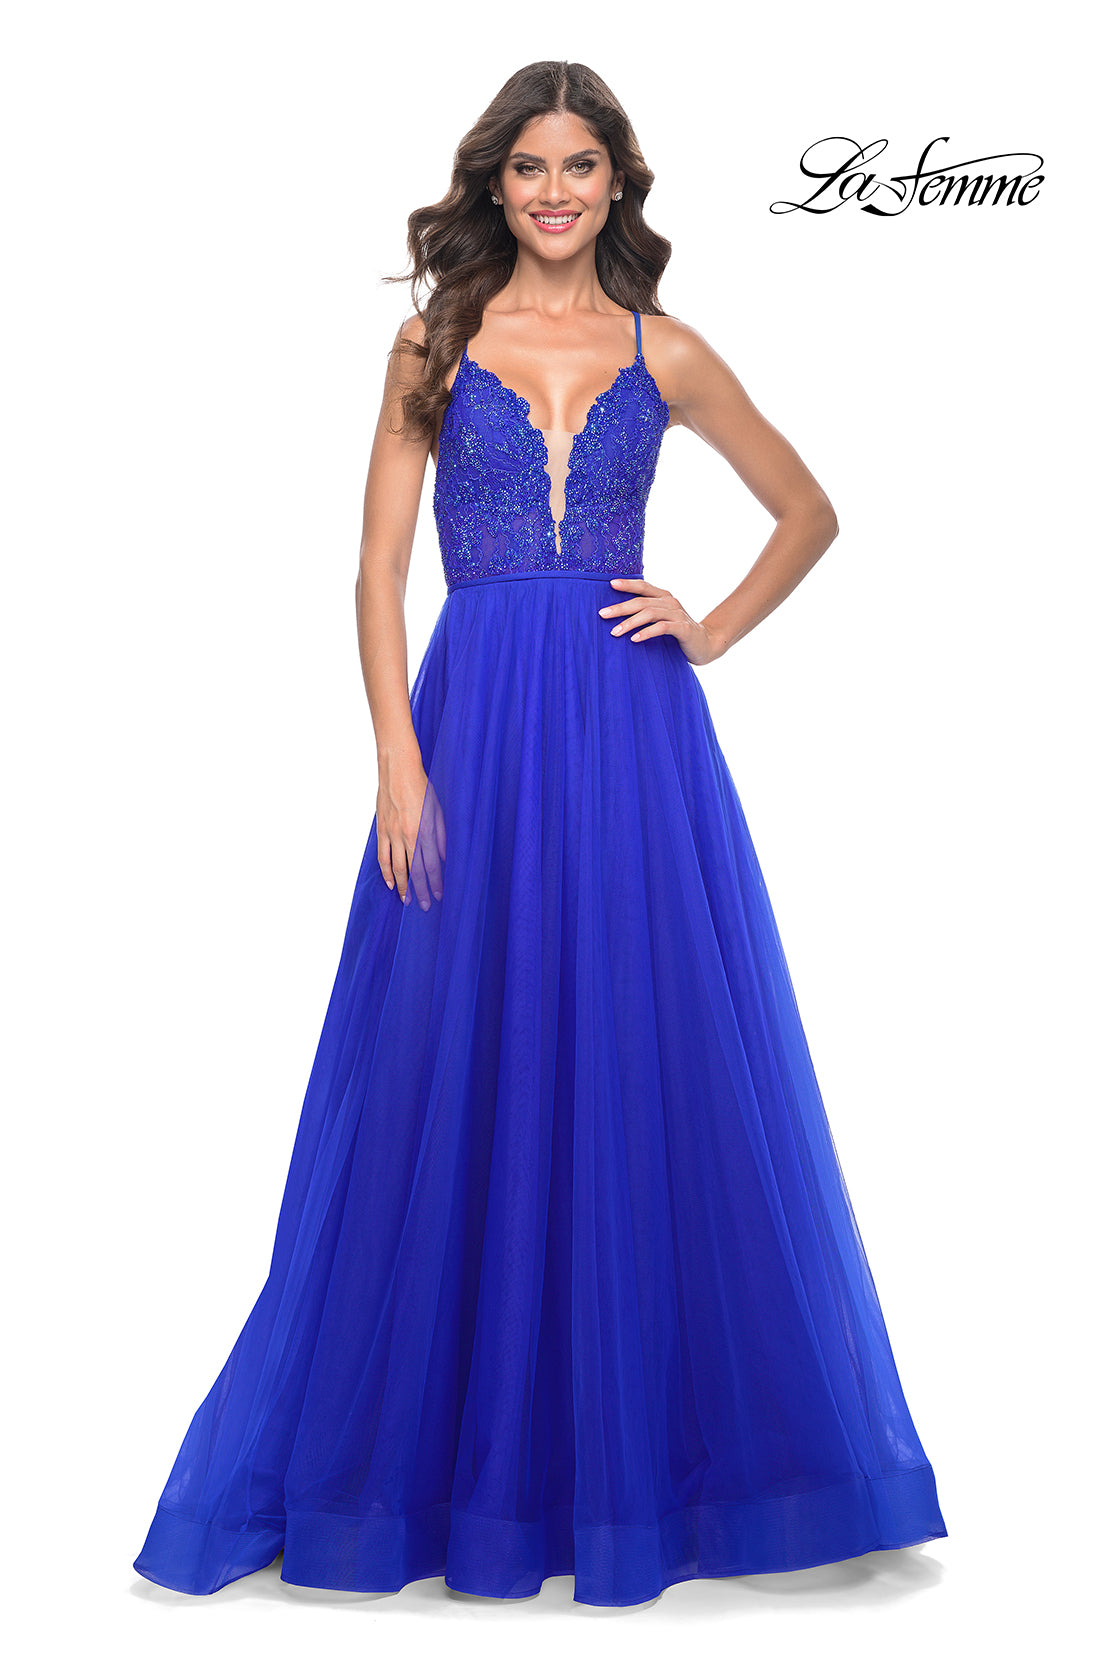 La-Femme-32059-Plunging-Neckline-Backless-Lace-Tulle-A-Line-Royal-Blue-Evening-Dress-B-Chic-Fashions-Prom-Dress